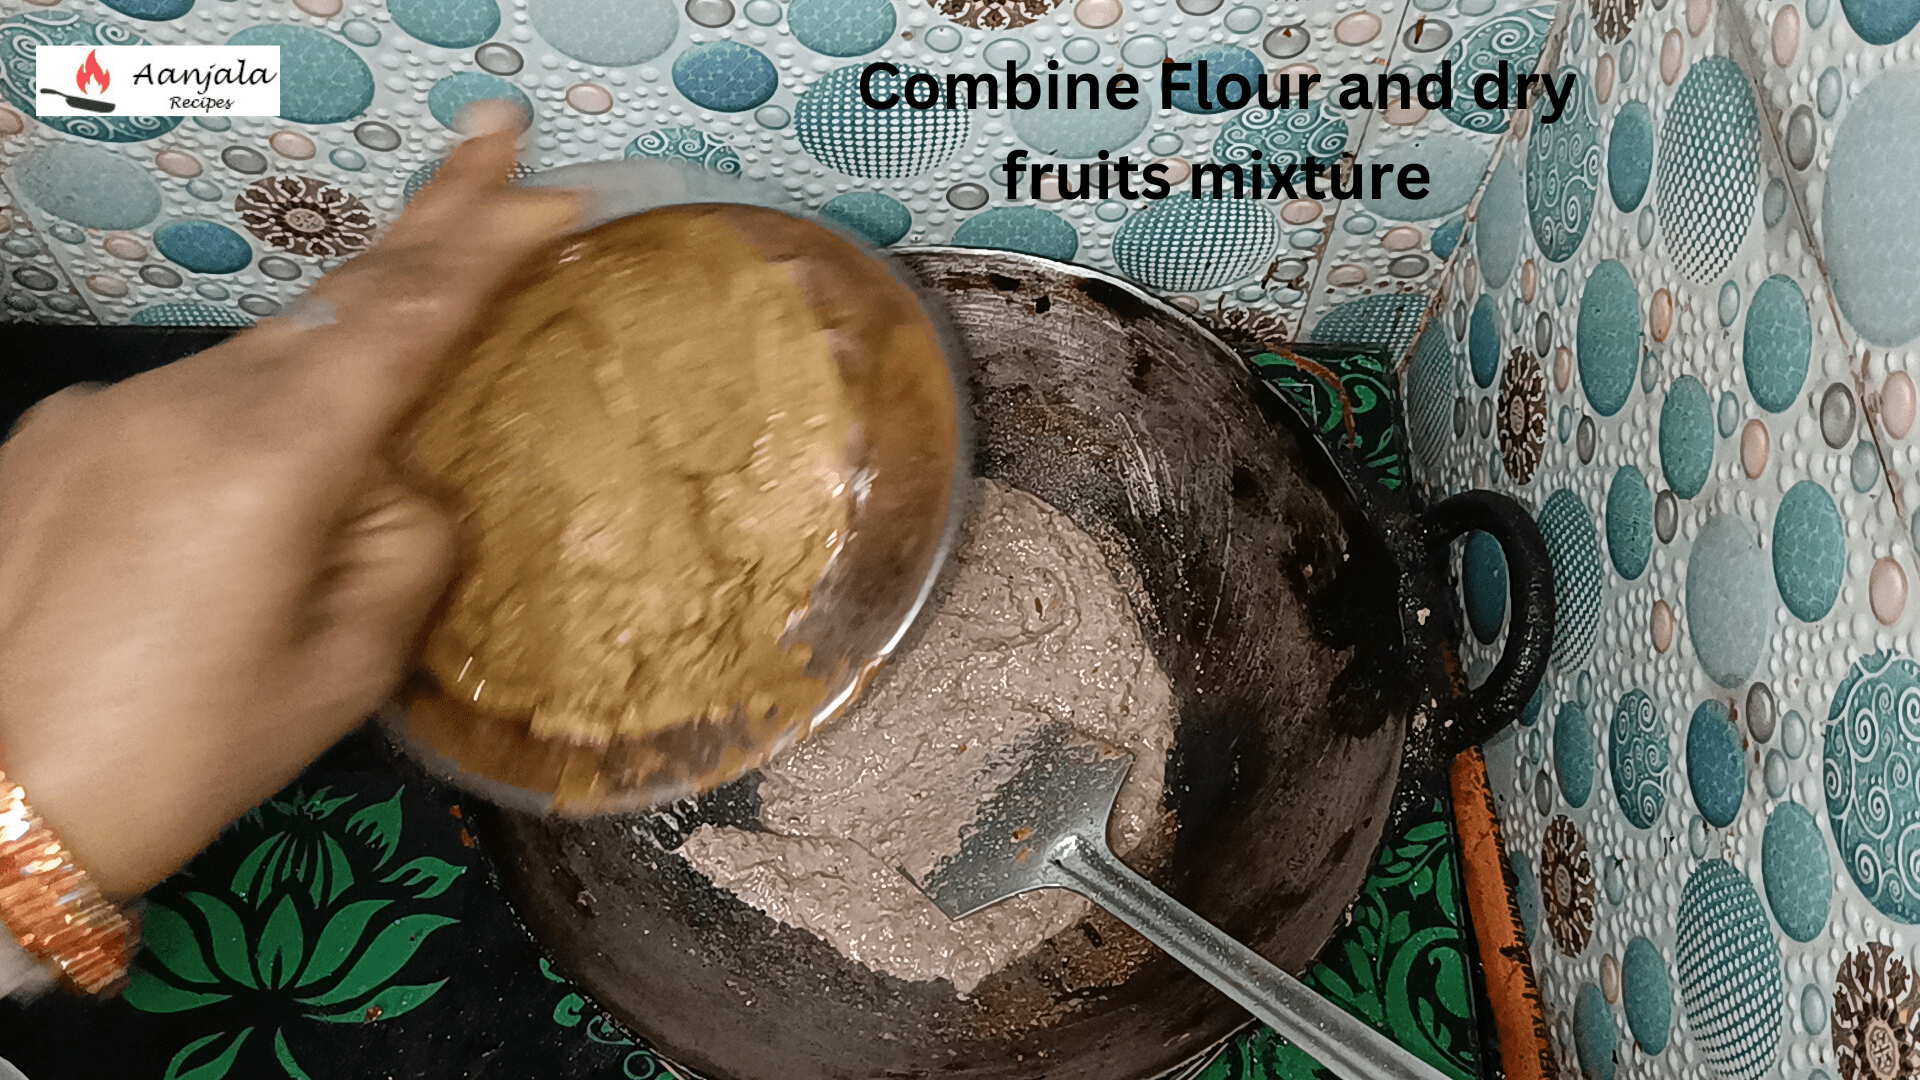 Combine Flour and dry fruits mixture